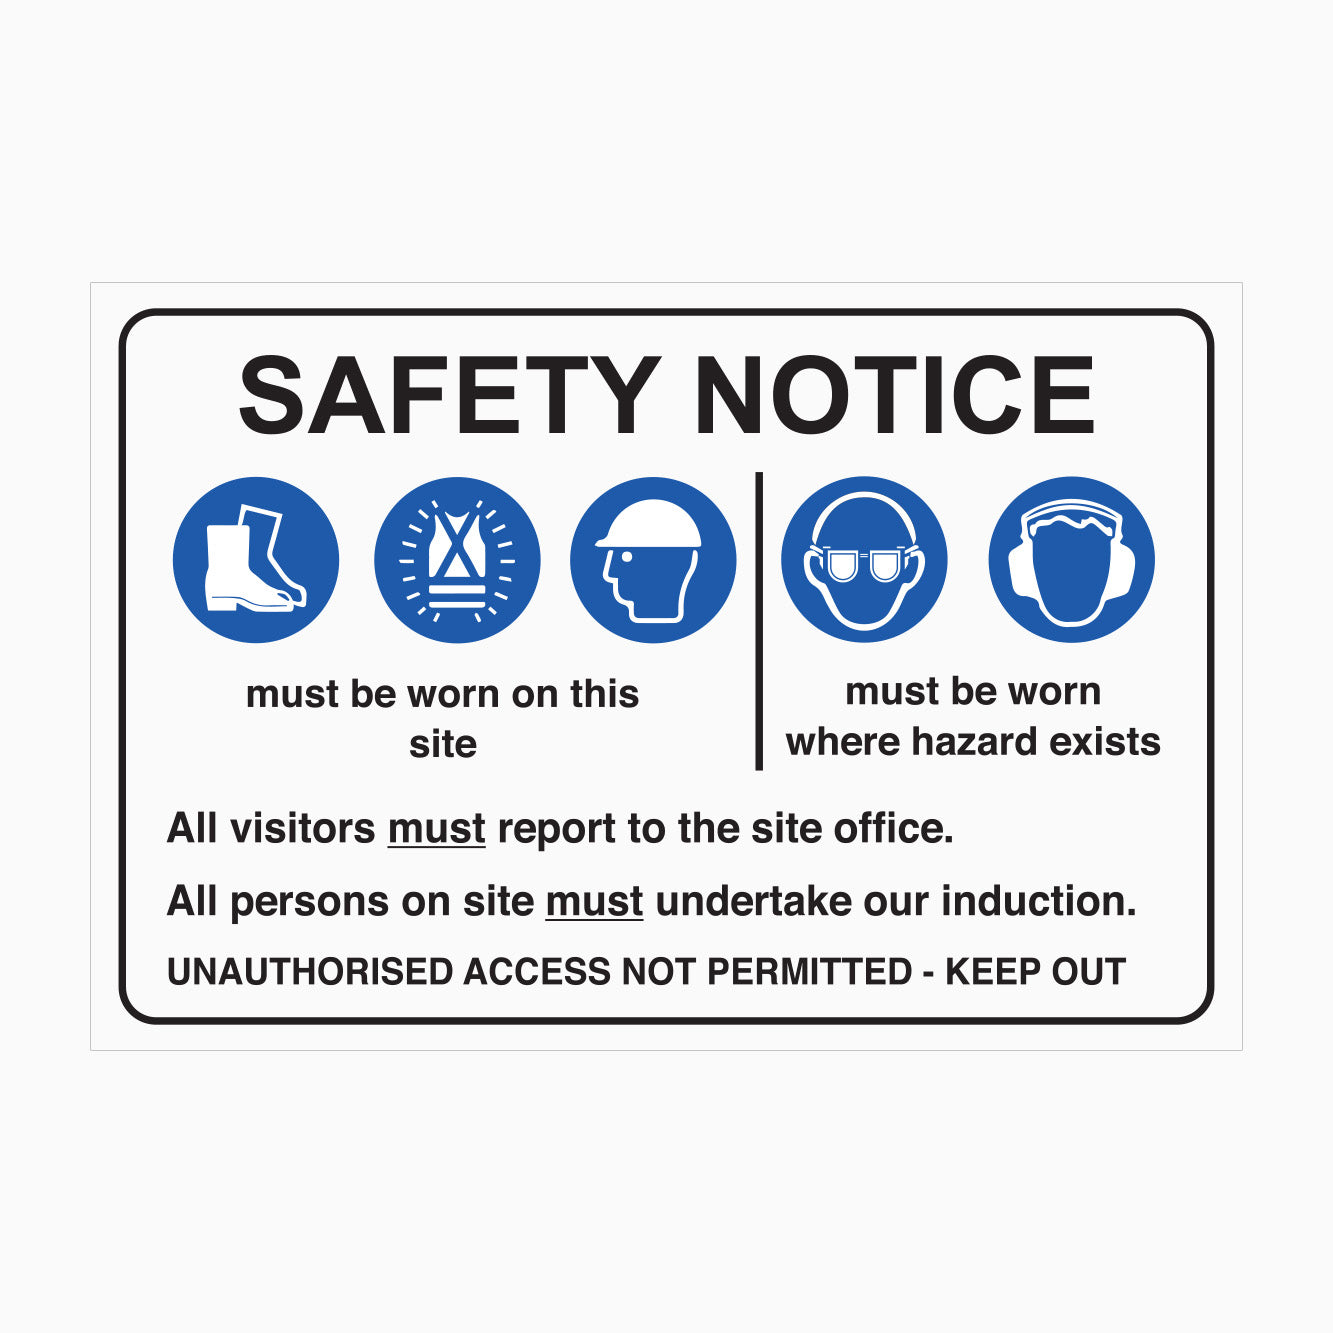 SAFETY NOTICE SIGN - SITE ENTRY MANDATORY SIGN